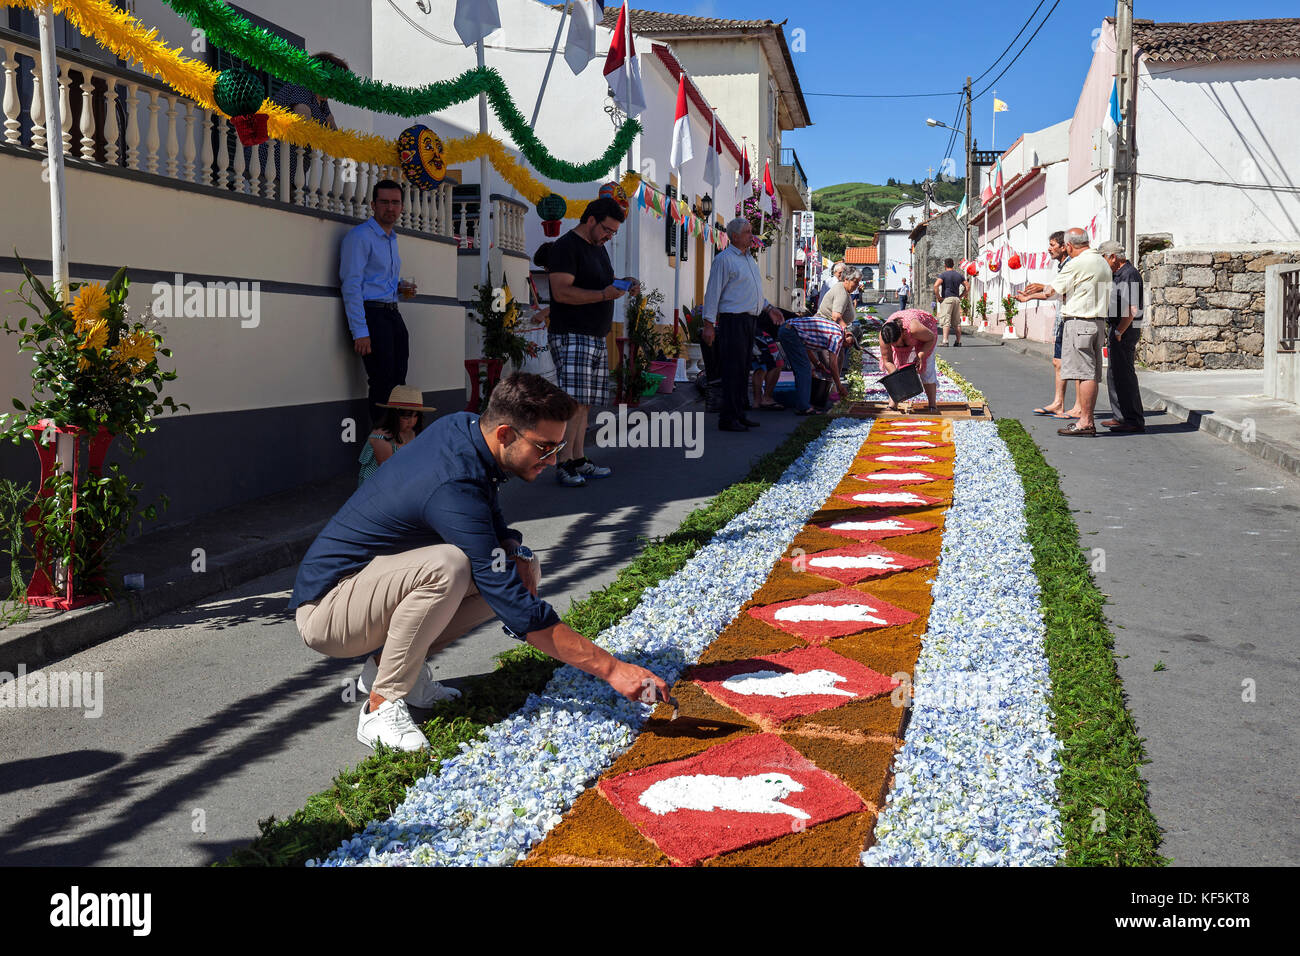 Flower carpet, preparation for the procession to the Santo Christo Fest, Ginetes, Island of Sao Miguel, Azores, Portugal Stock Photo